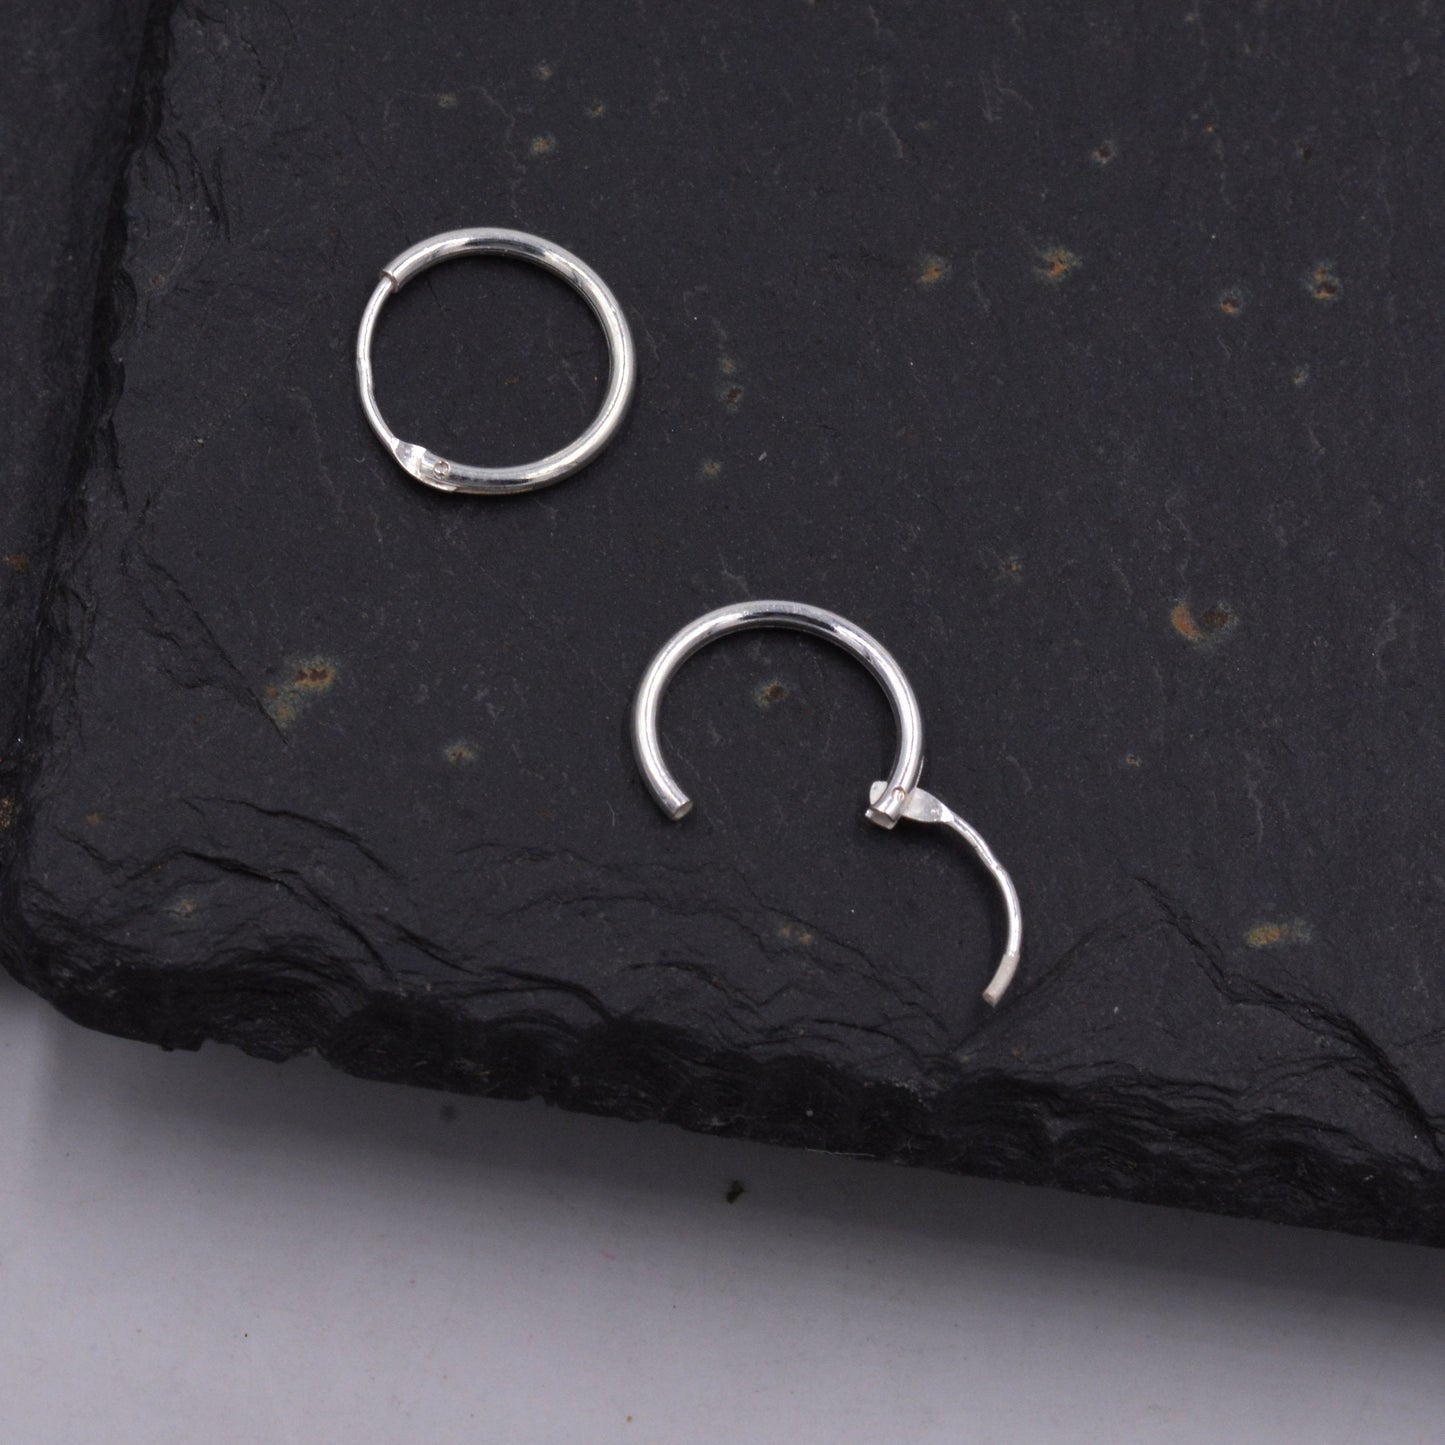 Geometric Small and Large Circle Hoop Earrings in Sterling Silver - Minimalist and Dainty Jewellery - Modern and Contemporary Design